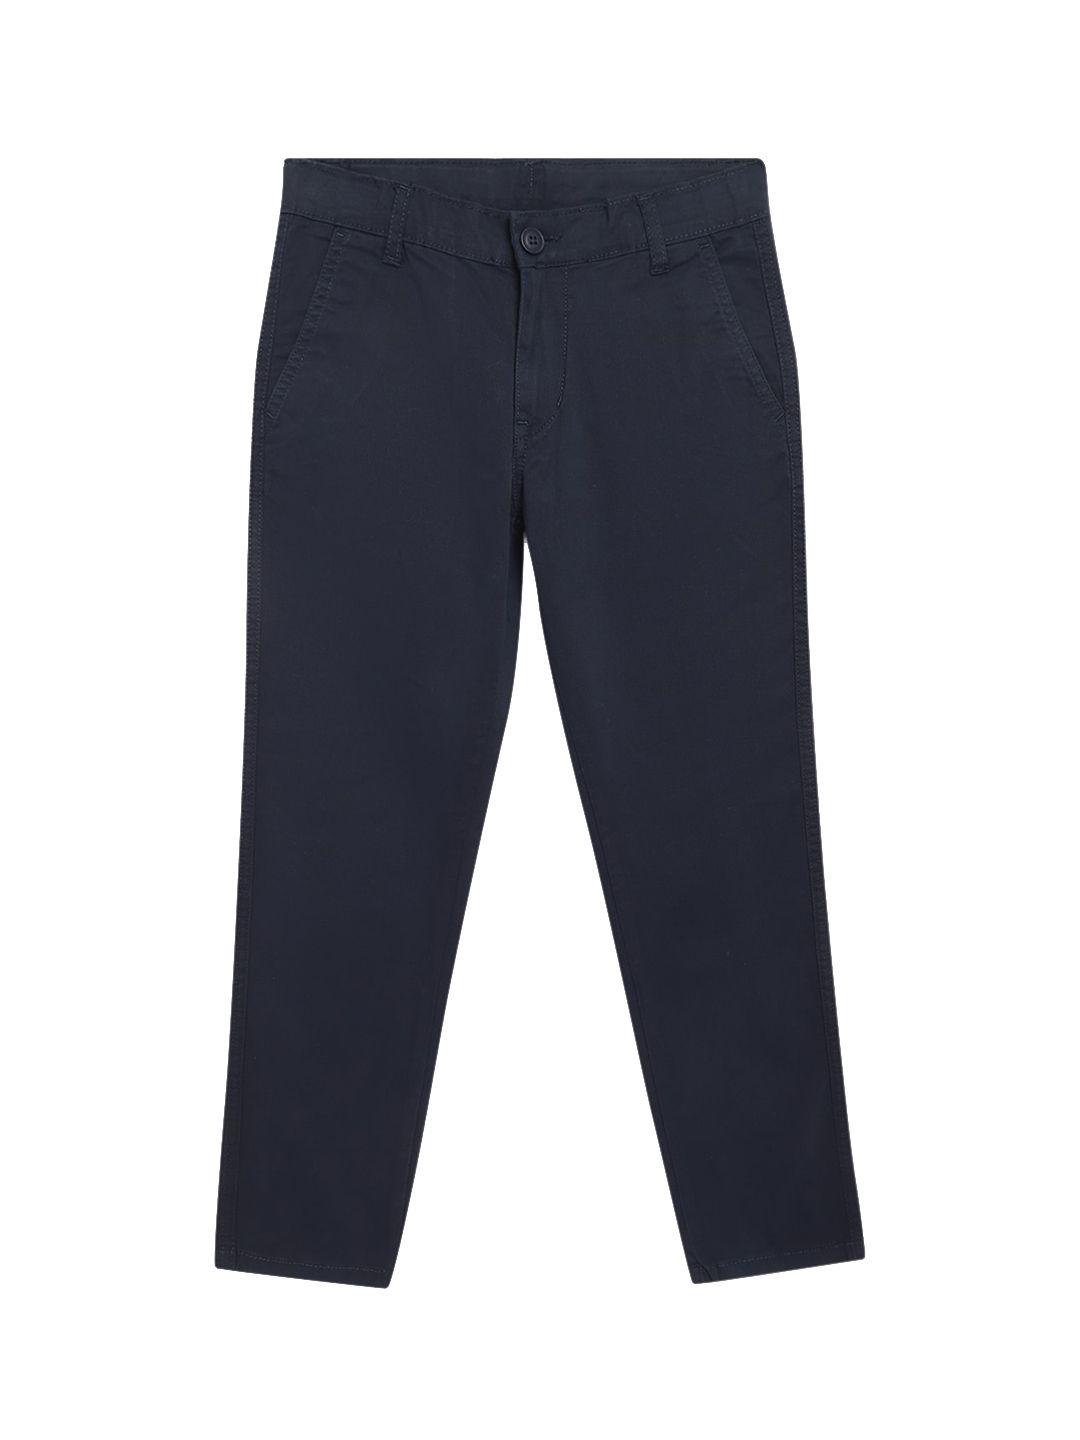 cantabil-kids-boys-solid-cotton-mid-rise-chinos-trousers